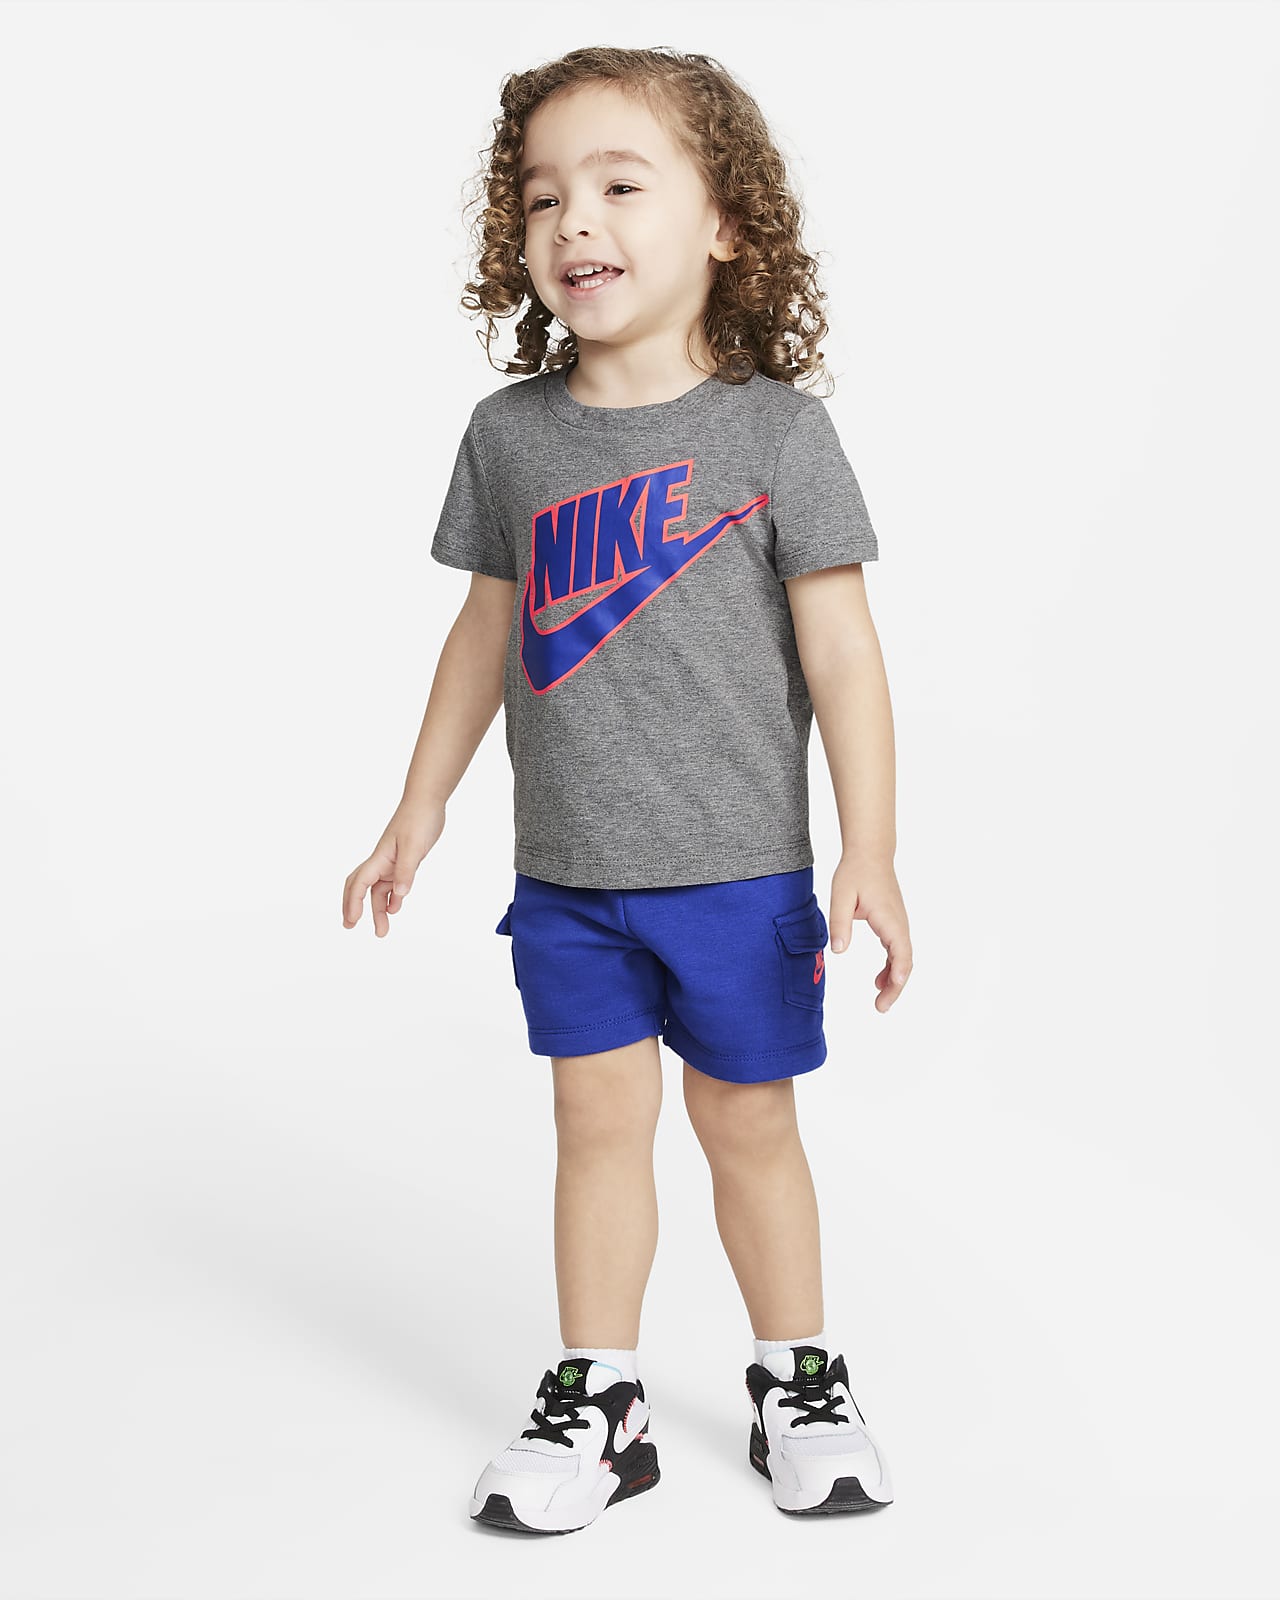 infant nike shorts and top set